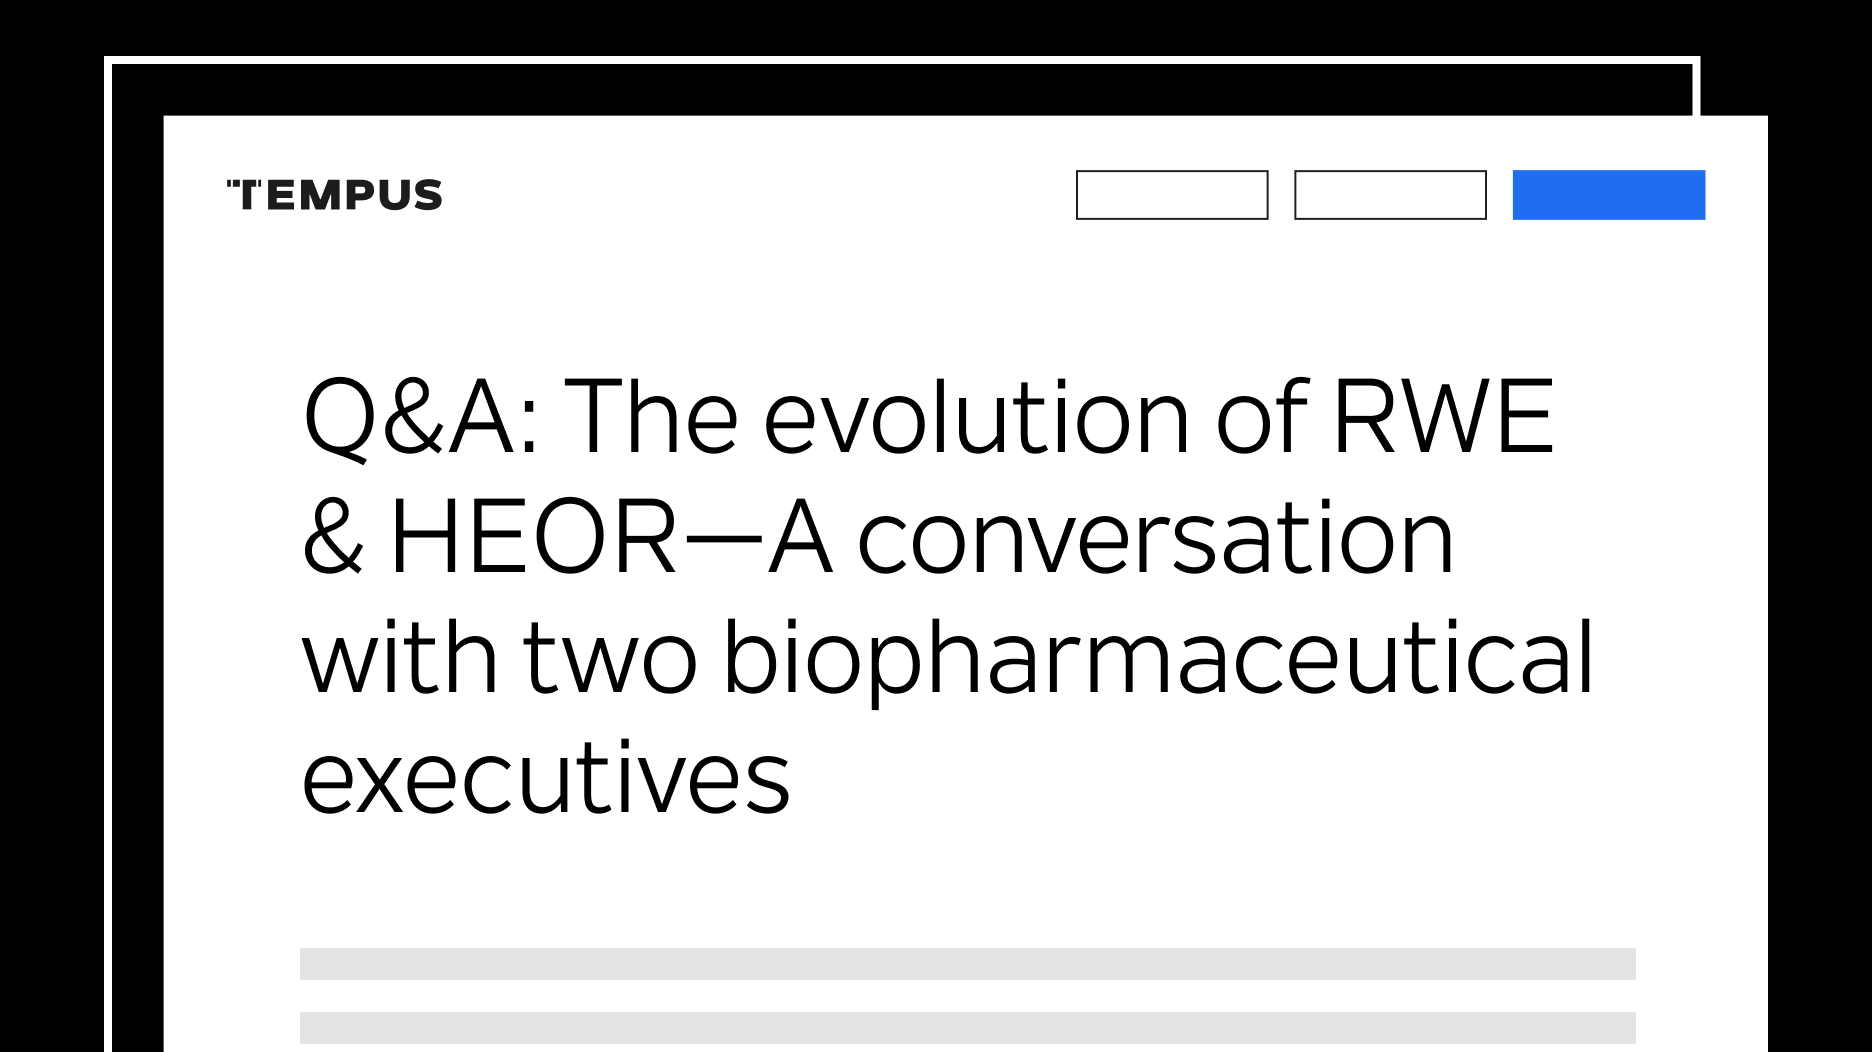 Q&A: The evolution of RWE & HEOR—A conversation with two biopharmaceutical executives